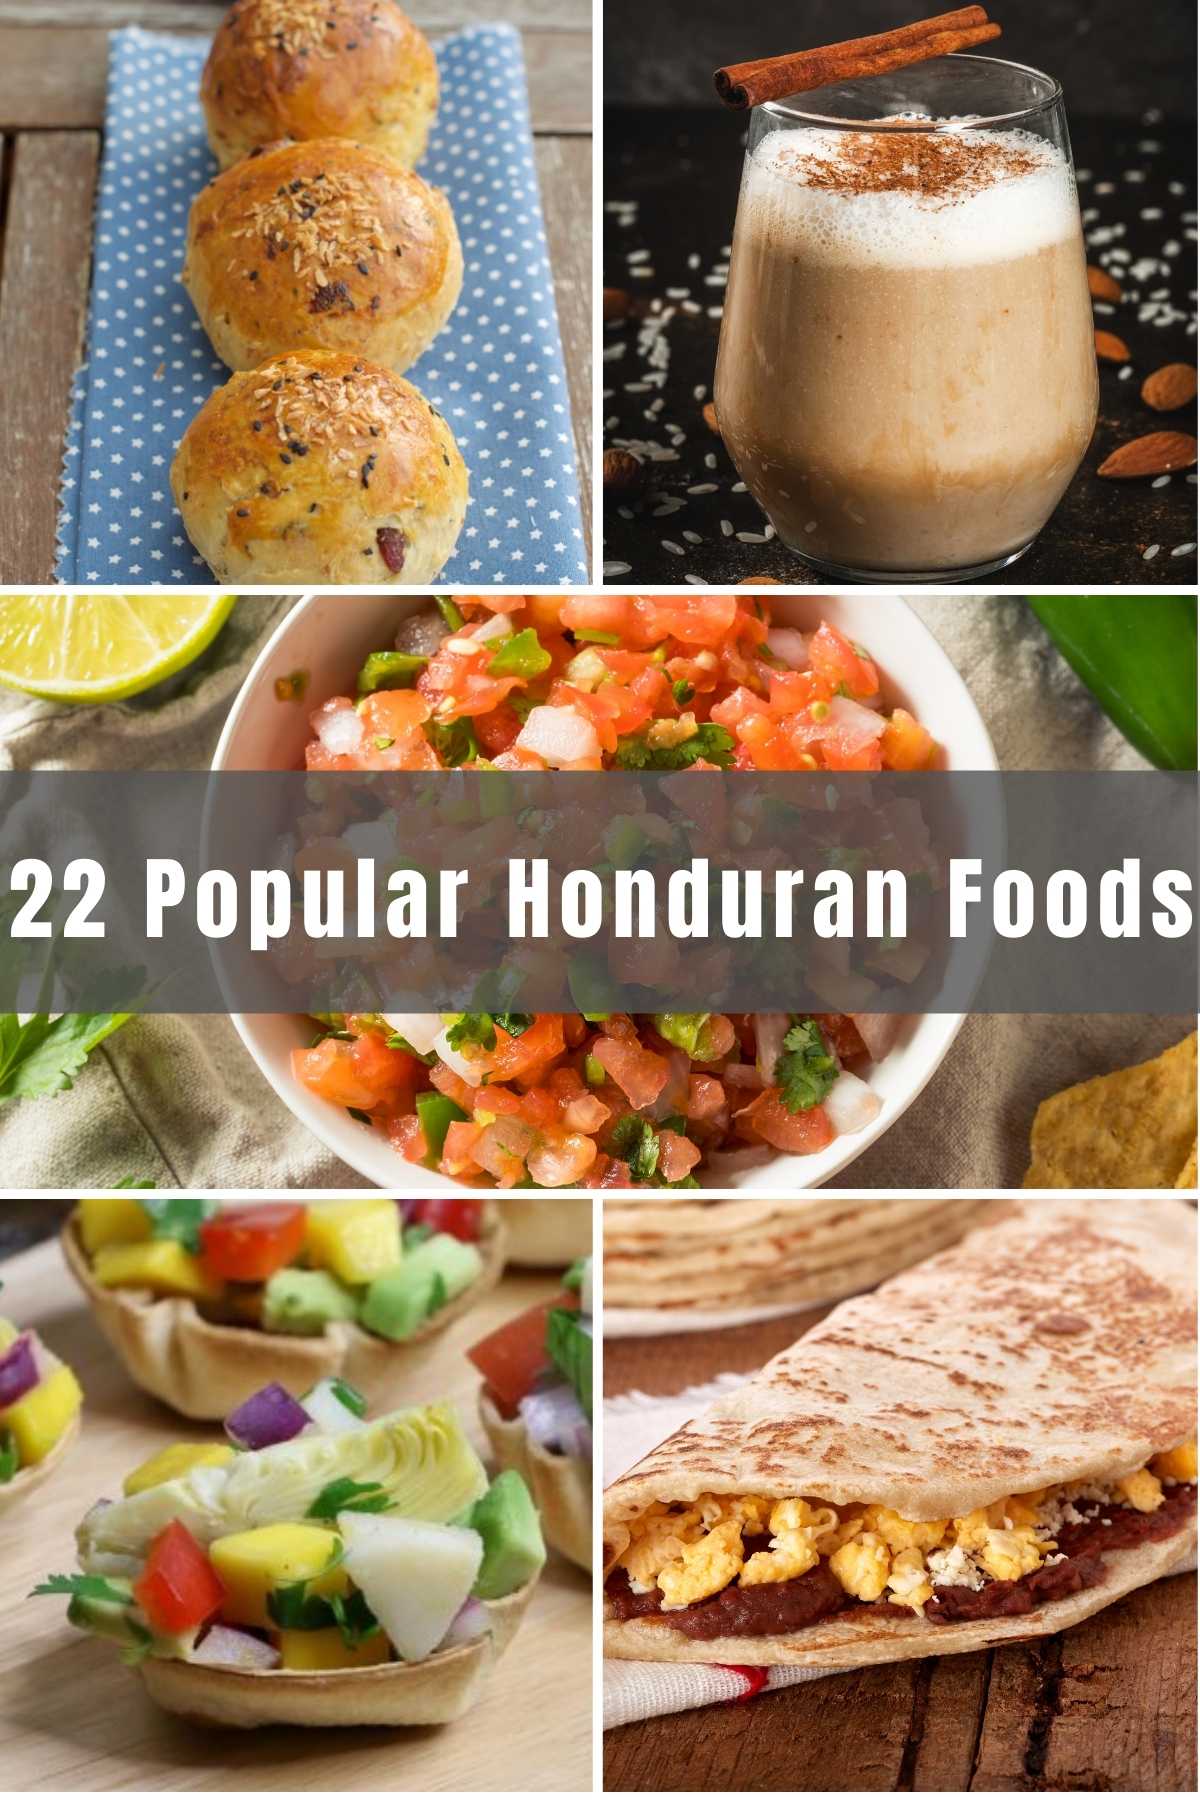 Located in Central America, Honduras is a Spanish-speaking country of over 9 million people. In addition to Spanish influence, Honduran foods are also a mixture of Caribbean and African flavors. Lucky for us, we don’t have to travel to Honduras to enjoy its food. We’ve gathered 22 Popular Honduran Foods to Try. Let’s get started!